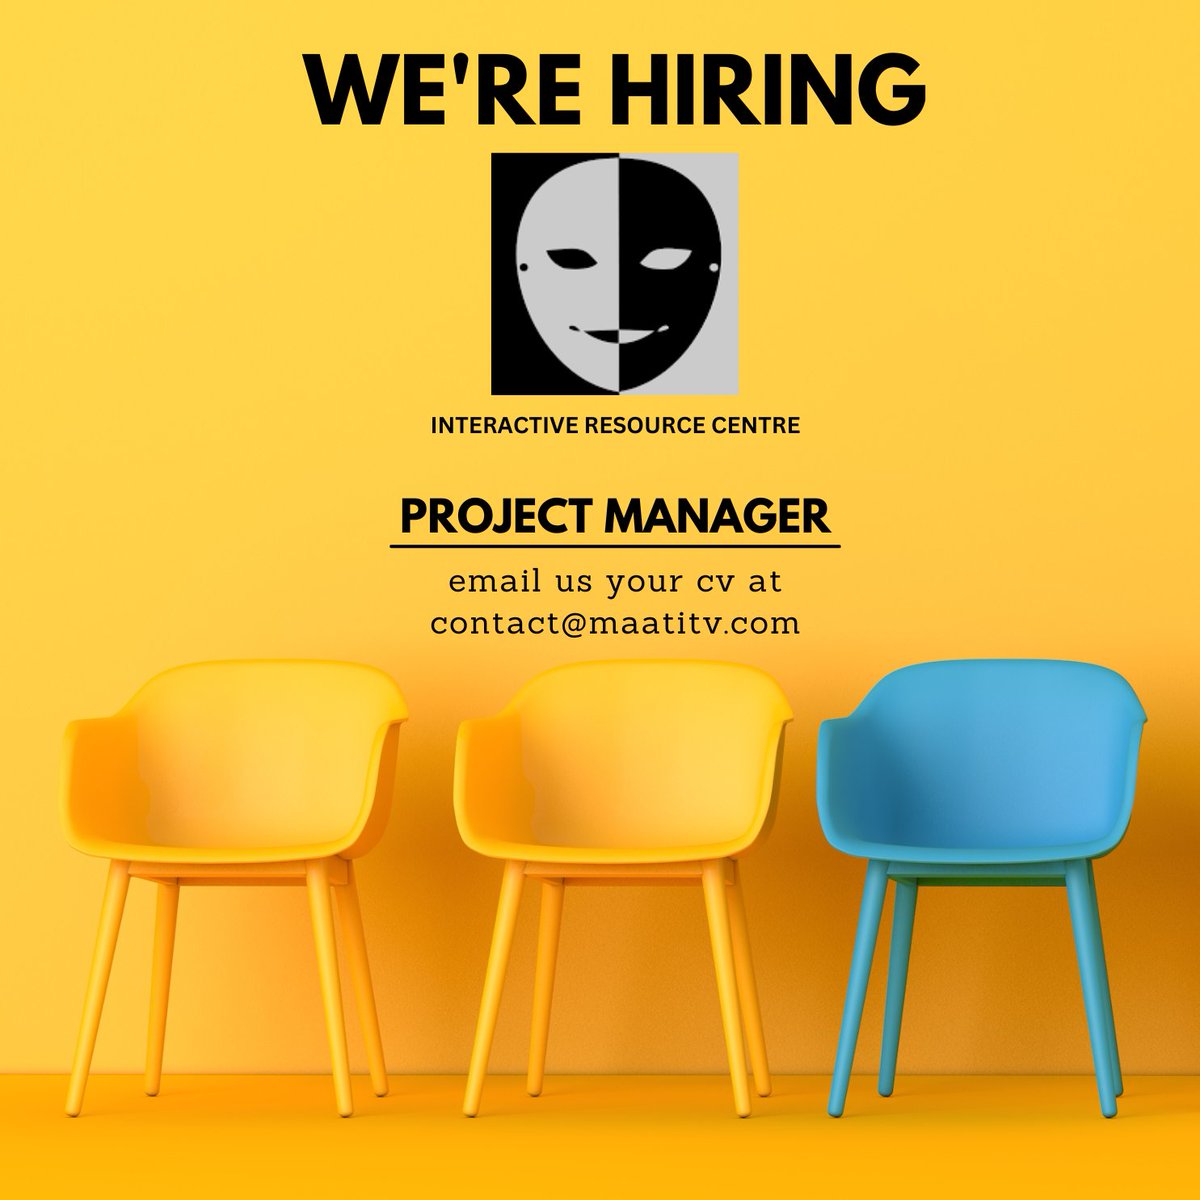 We at Interactive Resource Centre ( The parent organization of @maatitv ) is looking for a project manager. 
Details here:

linkedin.com/feed/

our website: irc-org.com
#jobsinlahore #HIRINGNOW #projectmanagement